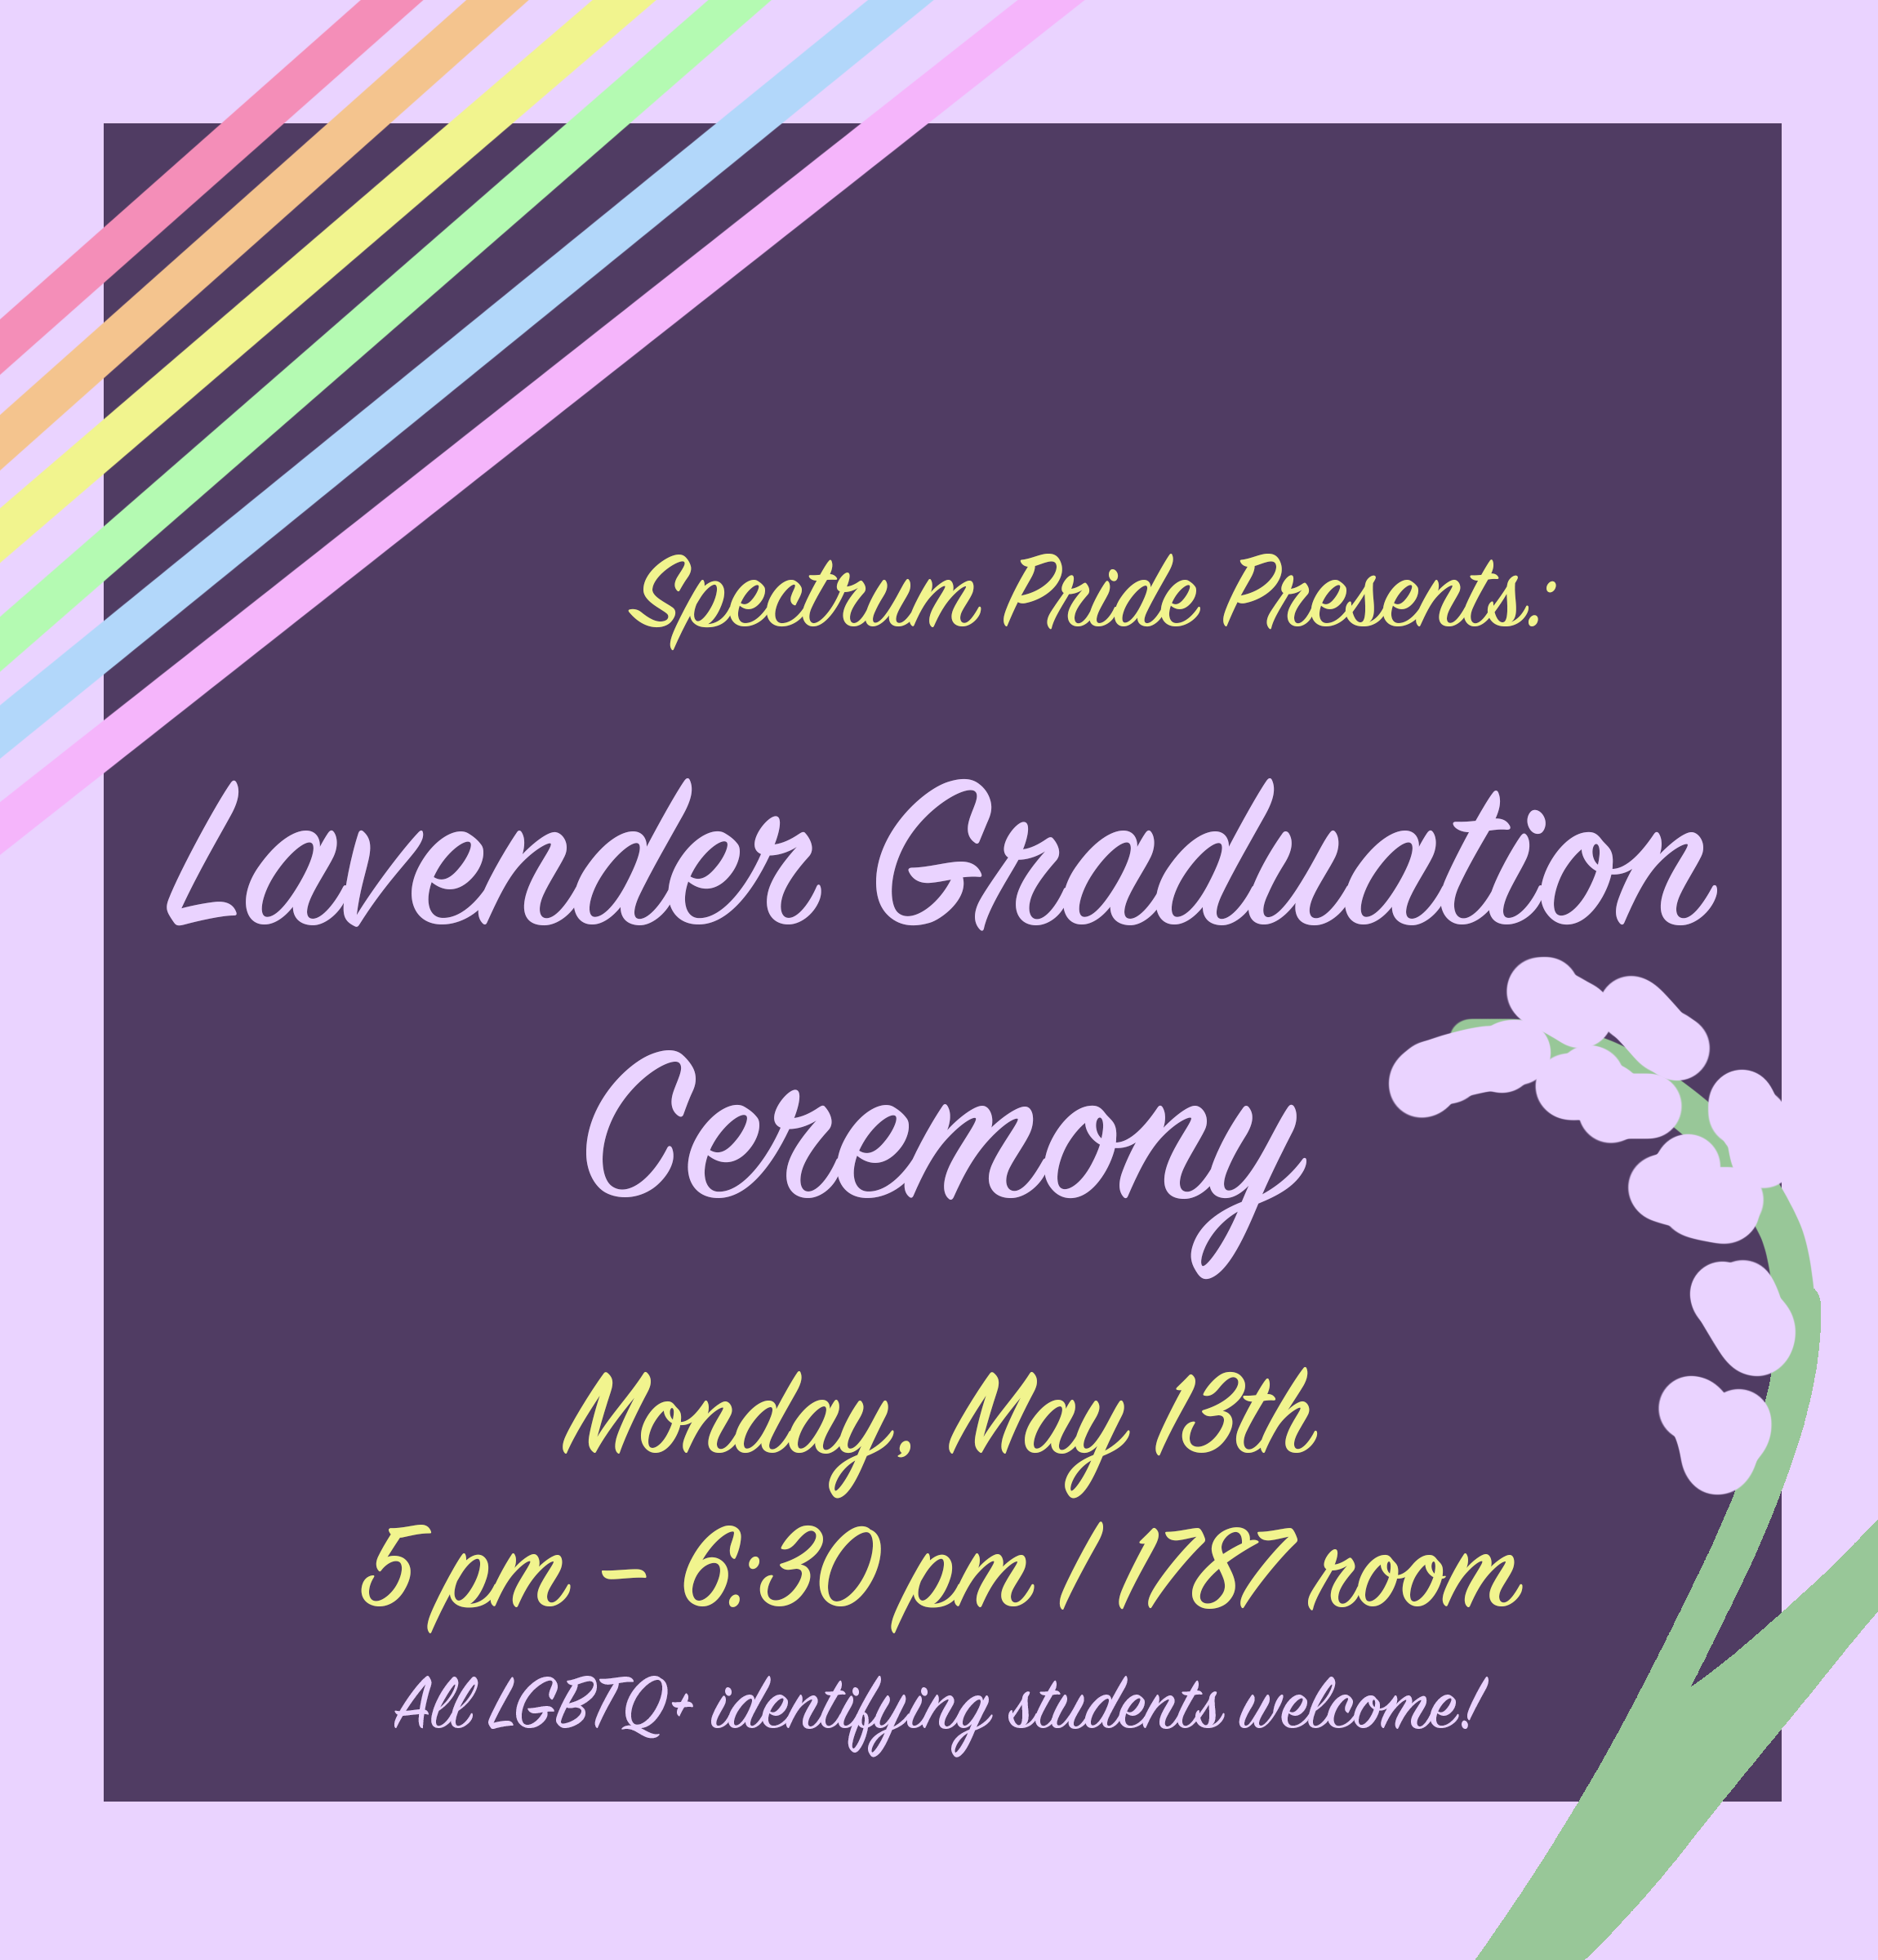 Spectrum Pride's First Ever Lavender Graduation Ceremony!

Monday, May 13th

5 pm – 6:30 pm | 1787 room

Dress Code: Formal

Food: Light snacks will be provided

While straight/cis allies are an integral part of the community, this celebration is solely intended for those who identify within the community.  On purple background surrounded by lavender and rainbow arranged lines.